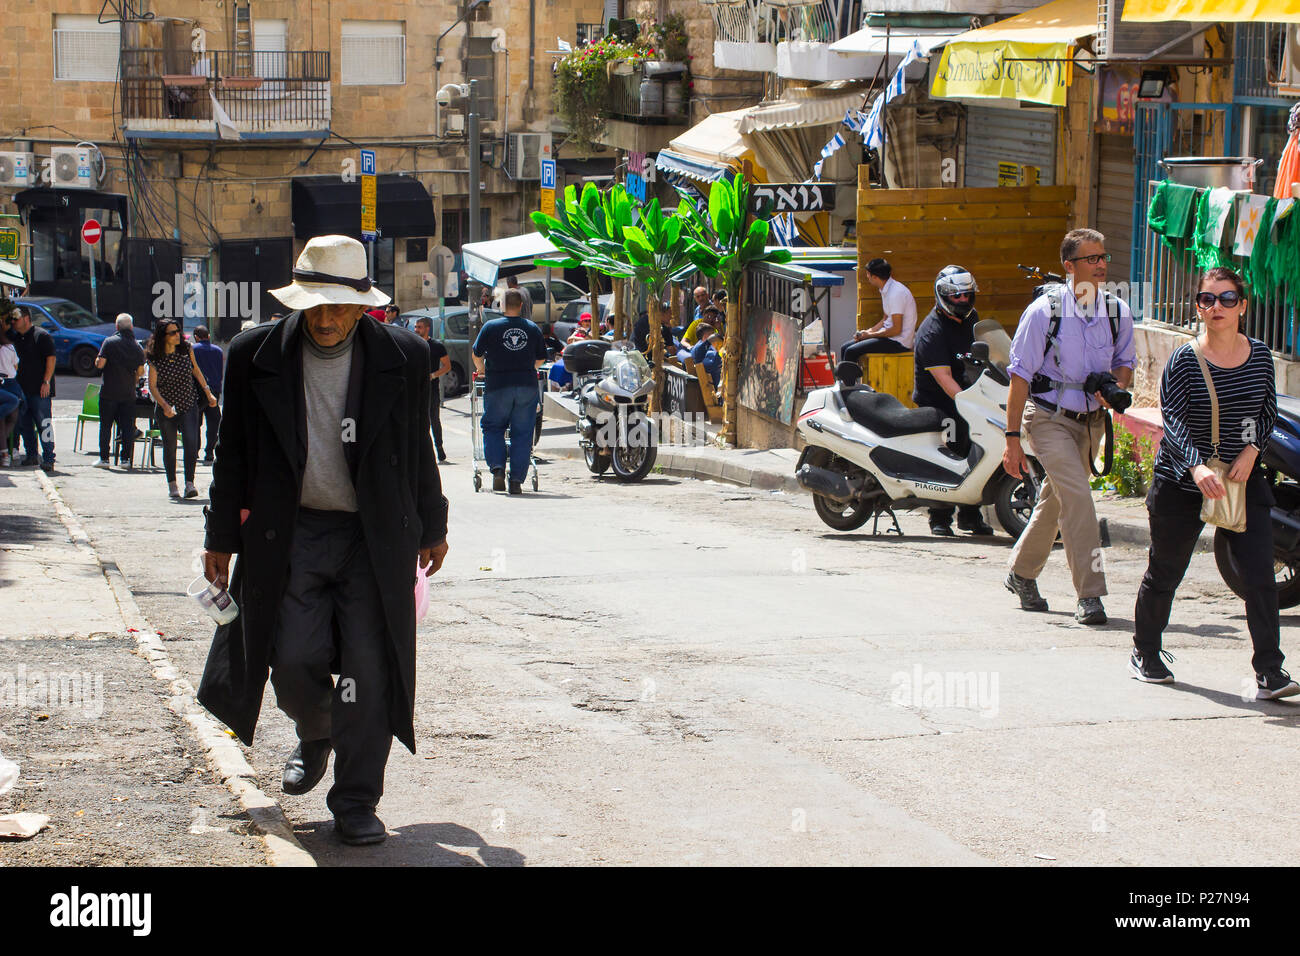 9 May 2018 An aged man in a long dark coat and floppy hat making his way up a hill at the busy Mahane Yehuda street market in Jerusalem Israel Stock Photo